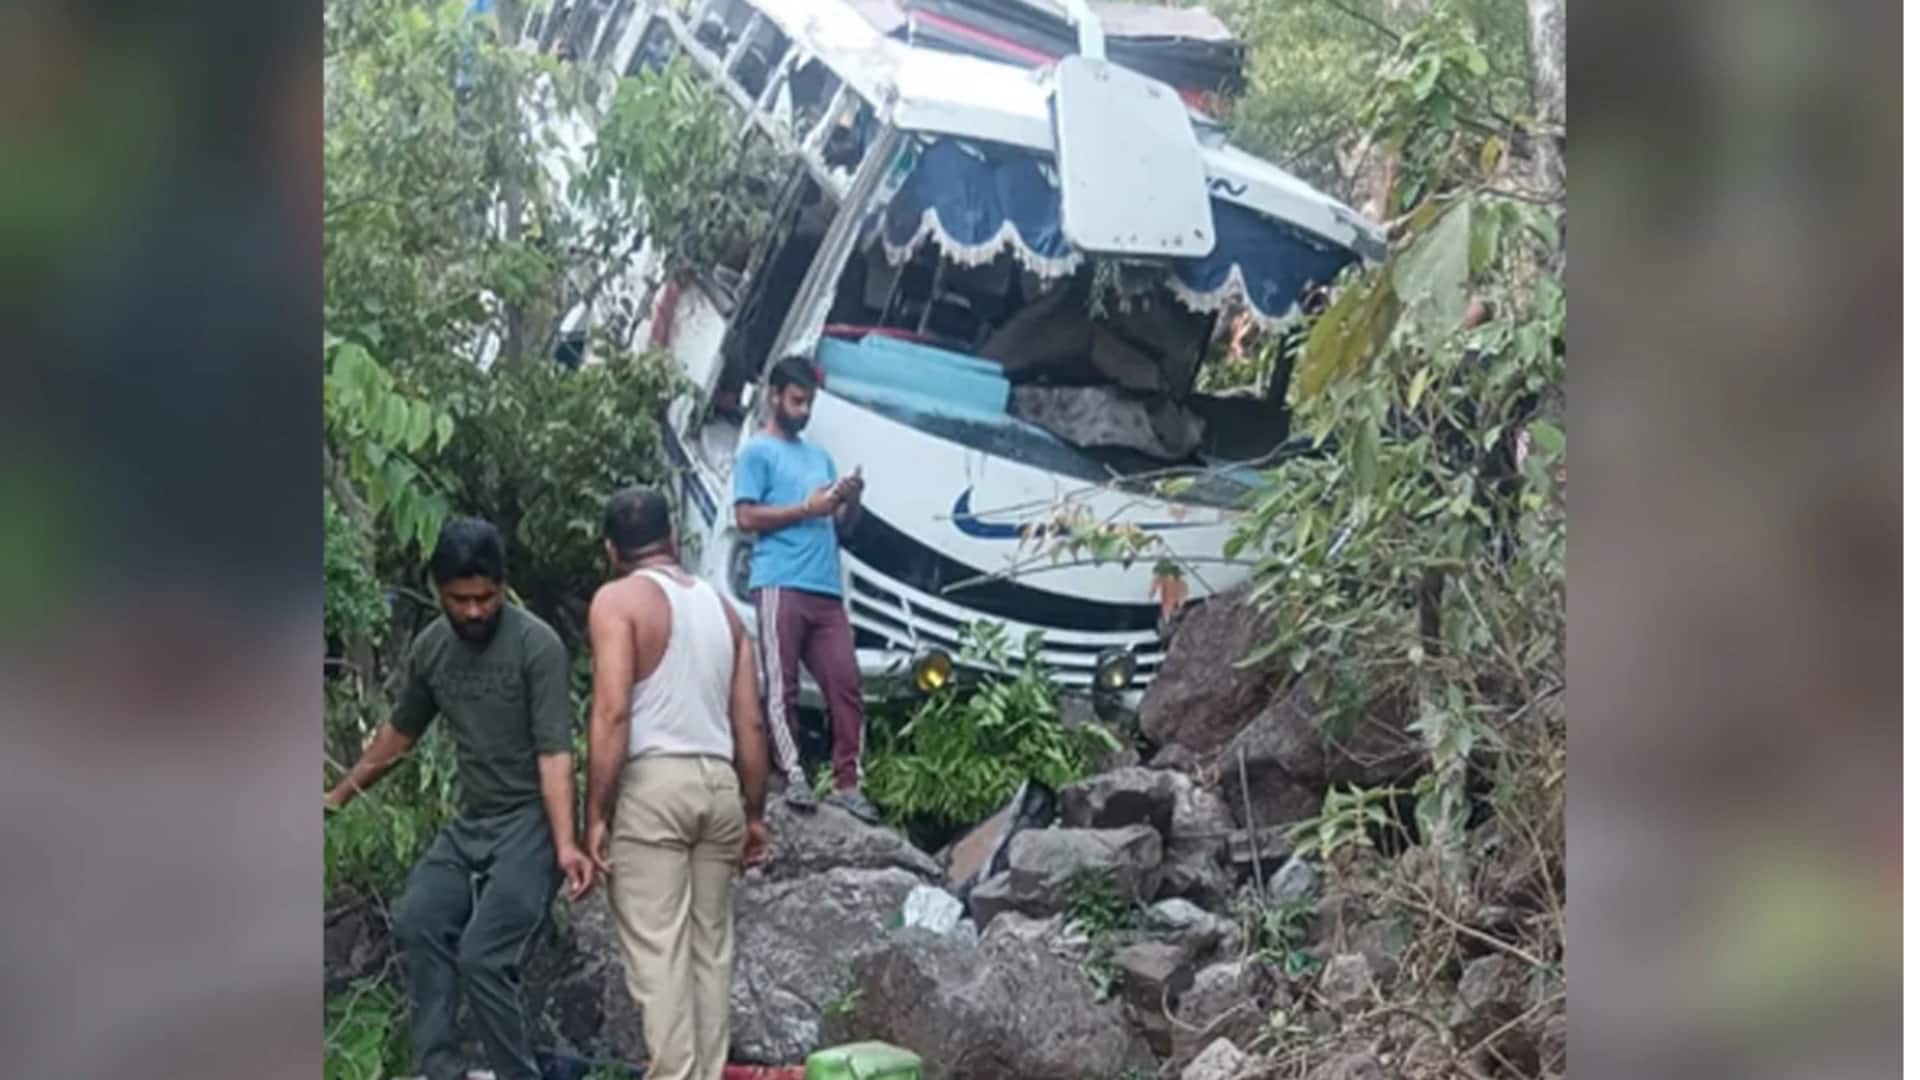 J&K: Bus carrying pilgrims falls into gorge after terrorist attack 